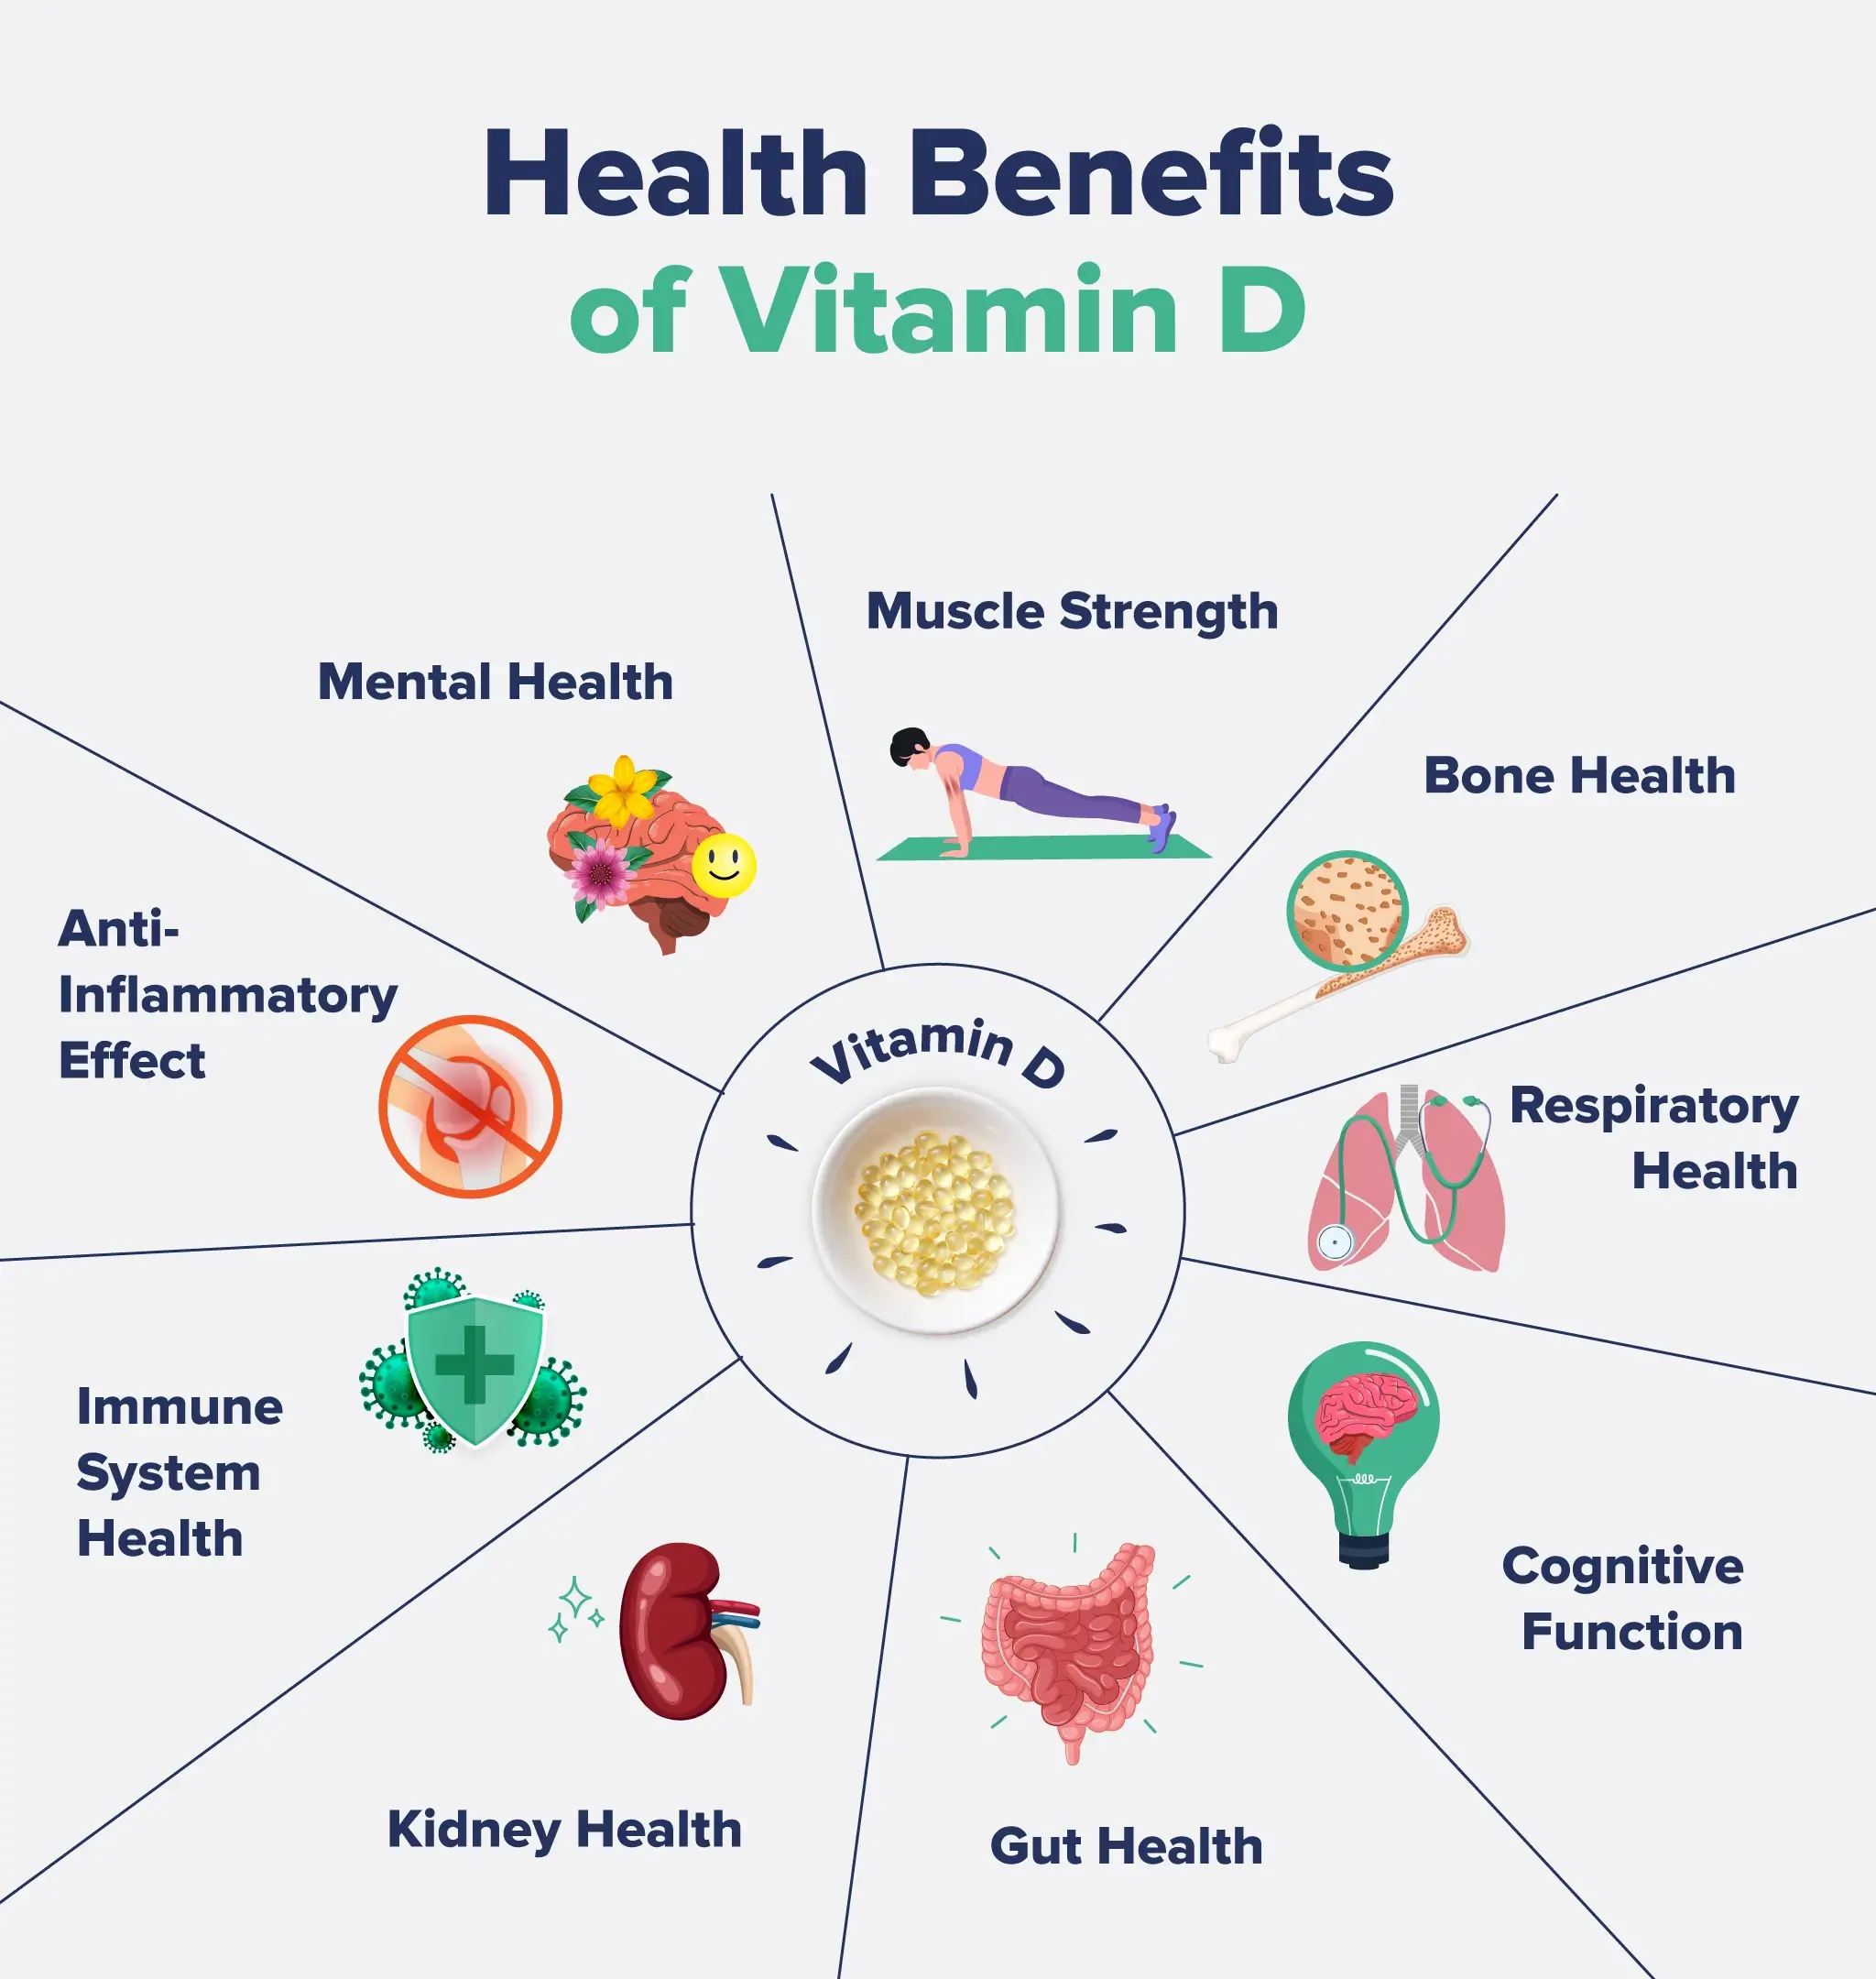 An infographic listing out the health benefits of Vitamin D.